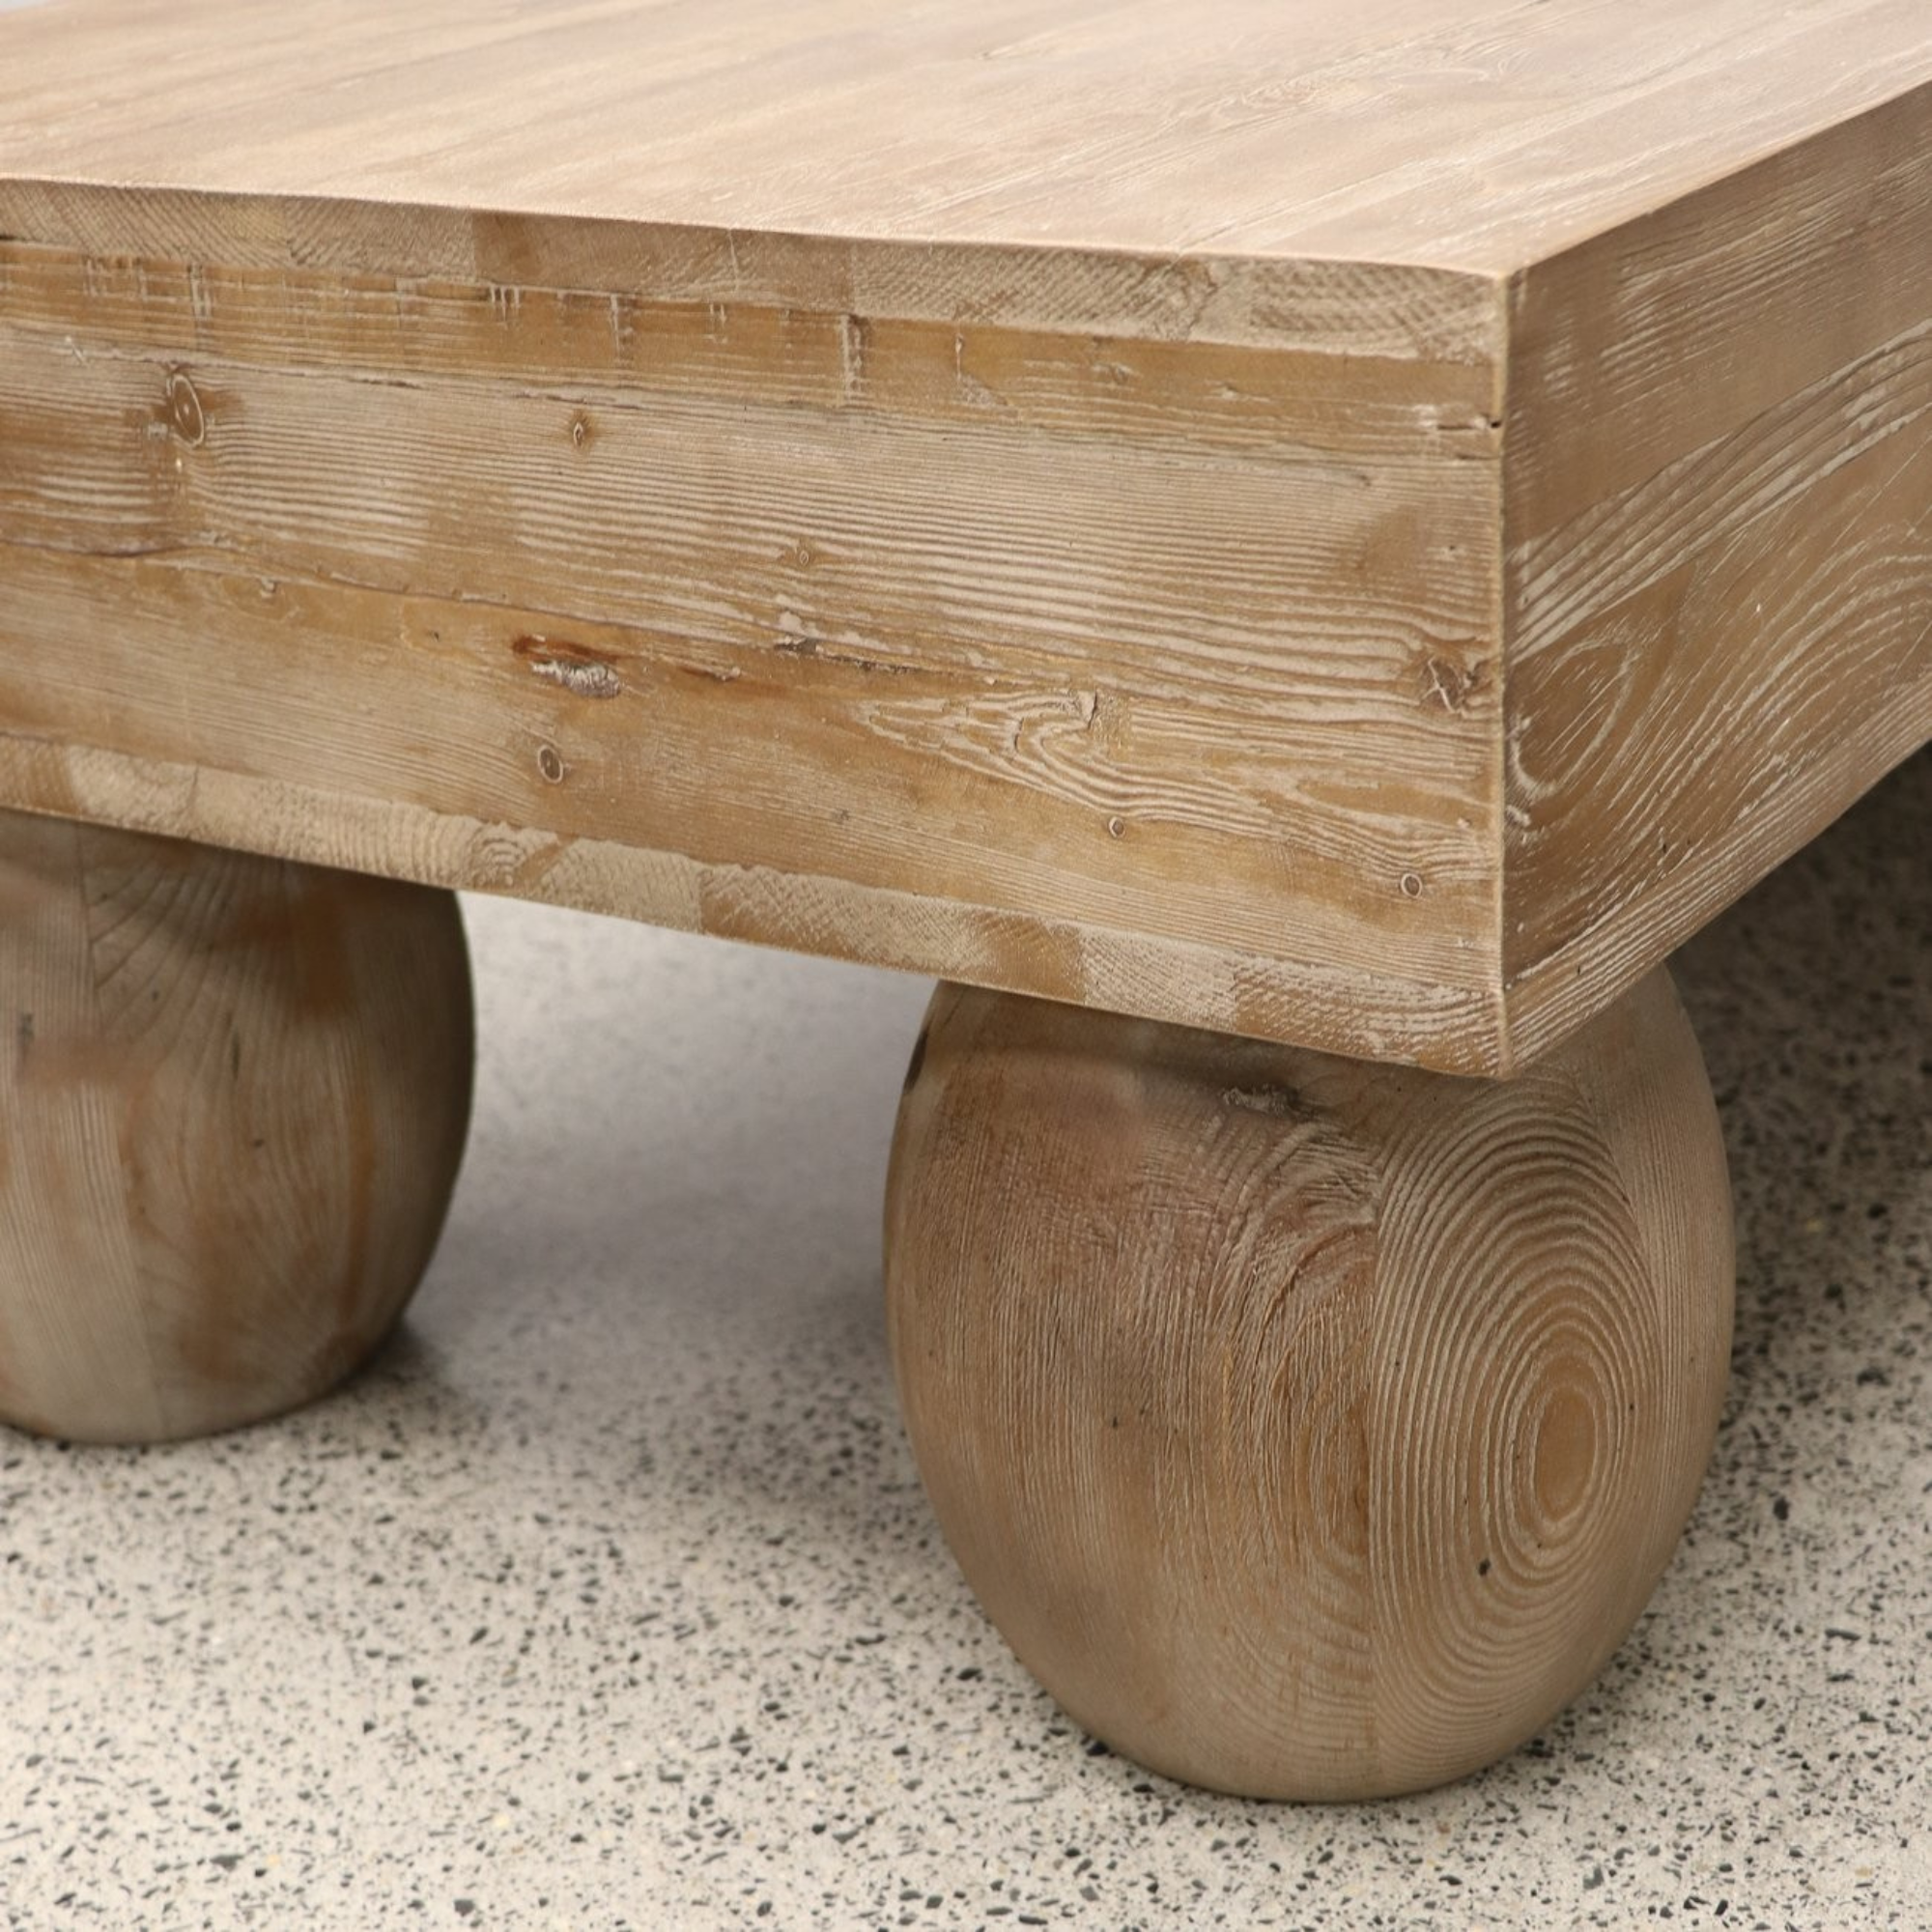 LIMITED EDITION | COFFEE TABLE